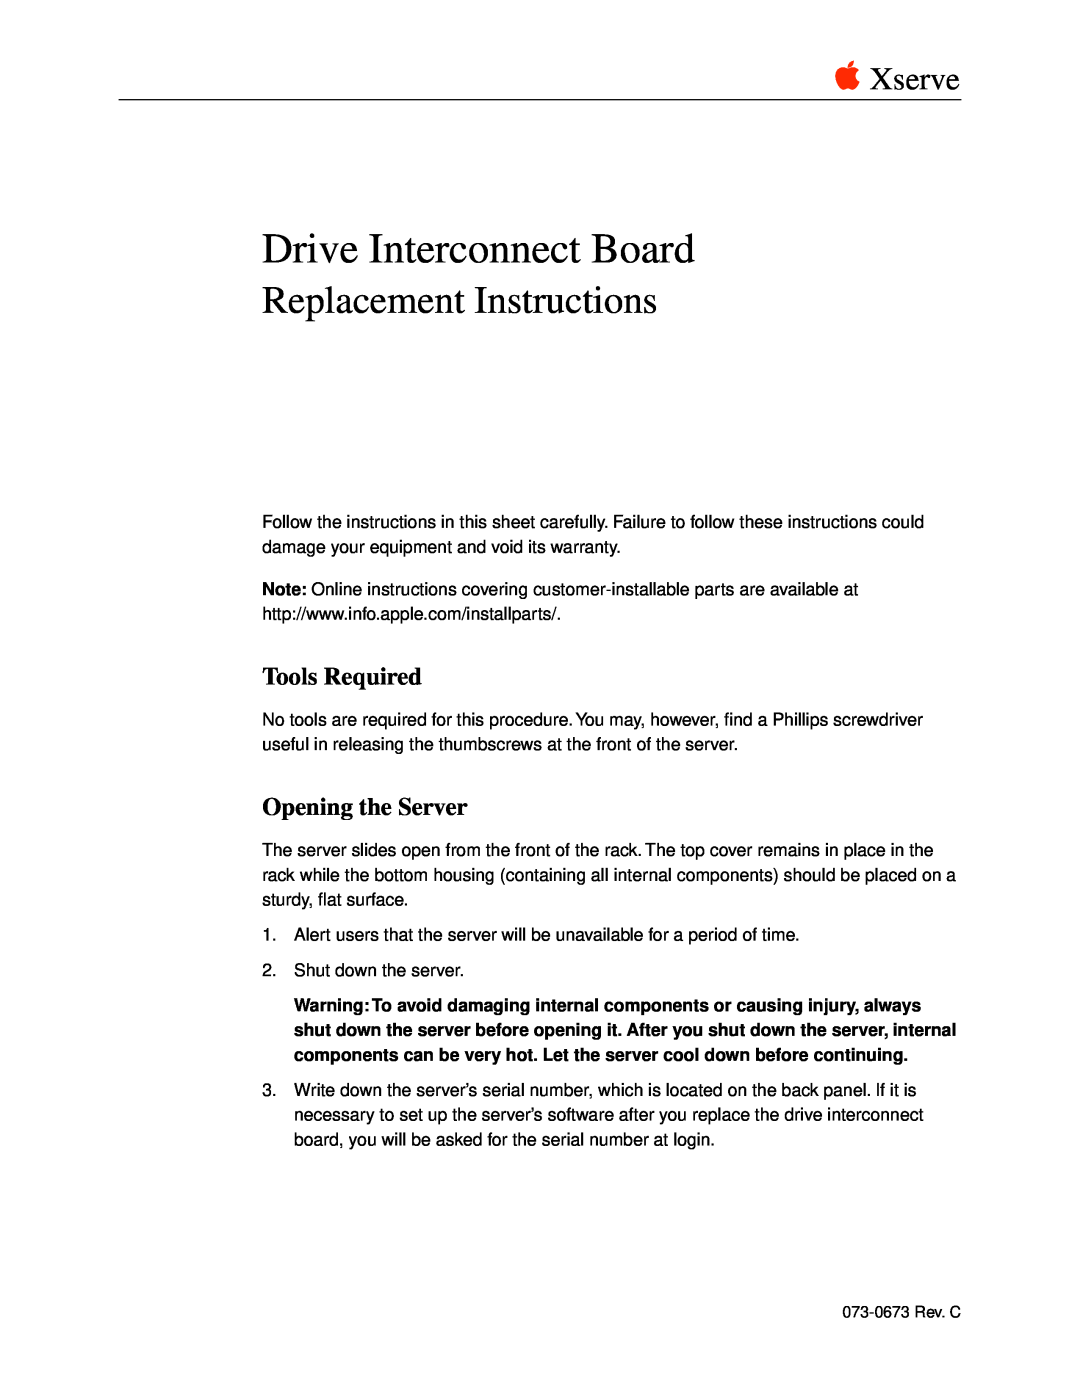 Apple Drive Interconnect Board warranty Tools Required, Opening the Server, Replacement Instructions, Xserve 